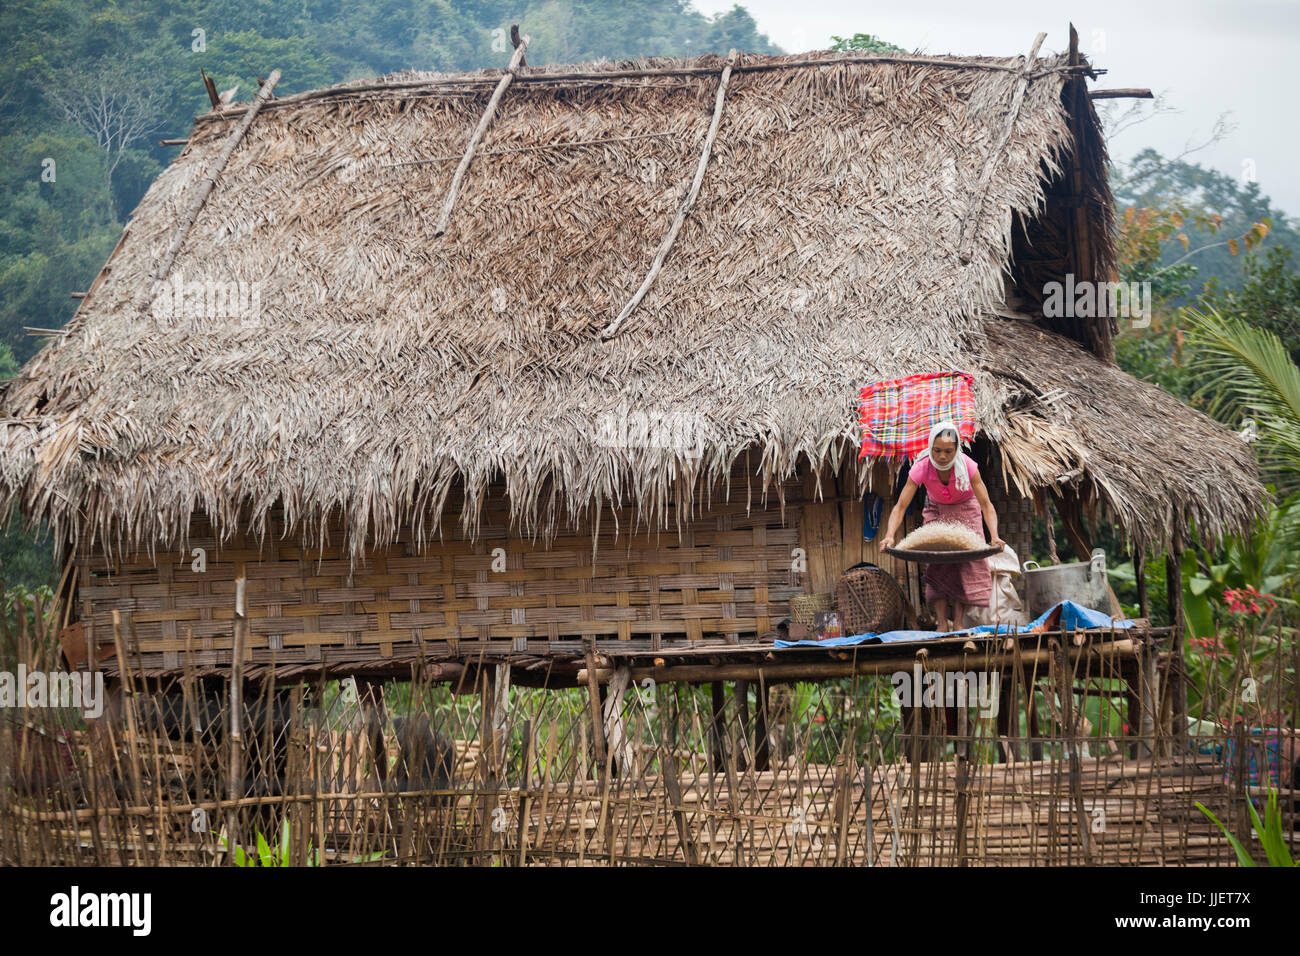 A woman separates rice from the hulls (husks) by shaking them in a flat basket on her front porch in Muang Hat Hin, Laos. Stock Photo